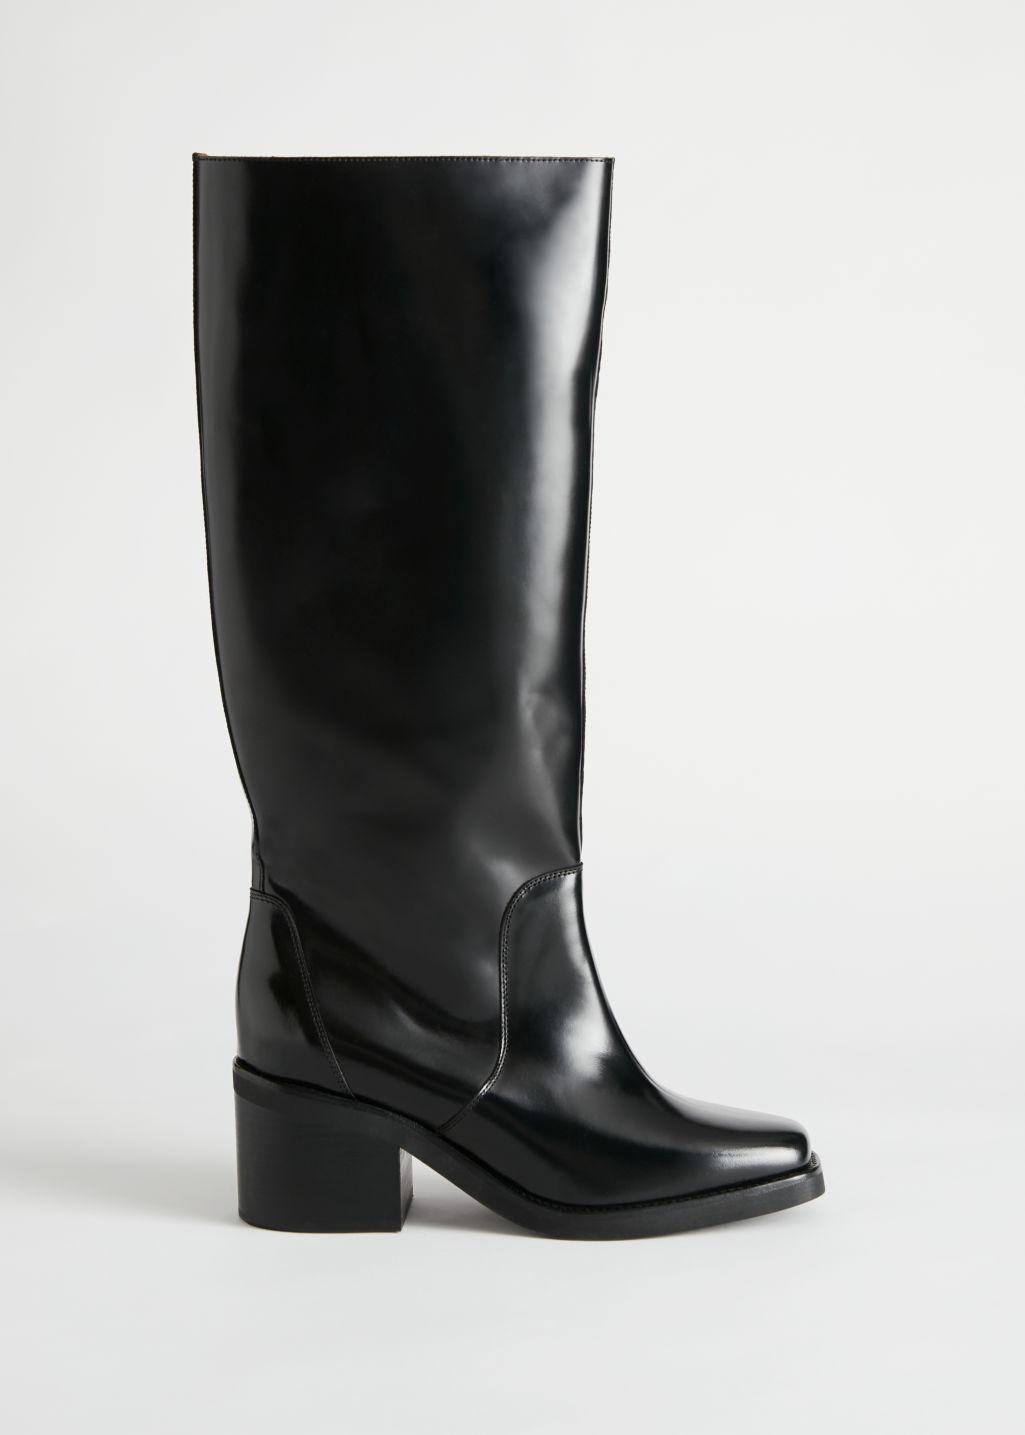 & Other Stories Square Toe Knee High Leather Boots in Black - Lyst